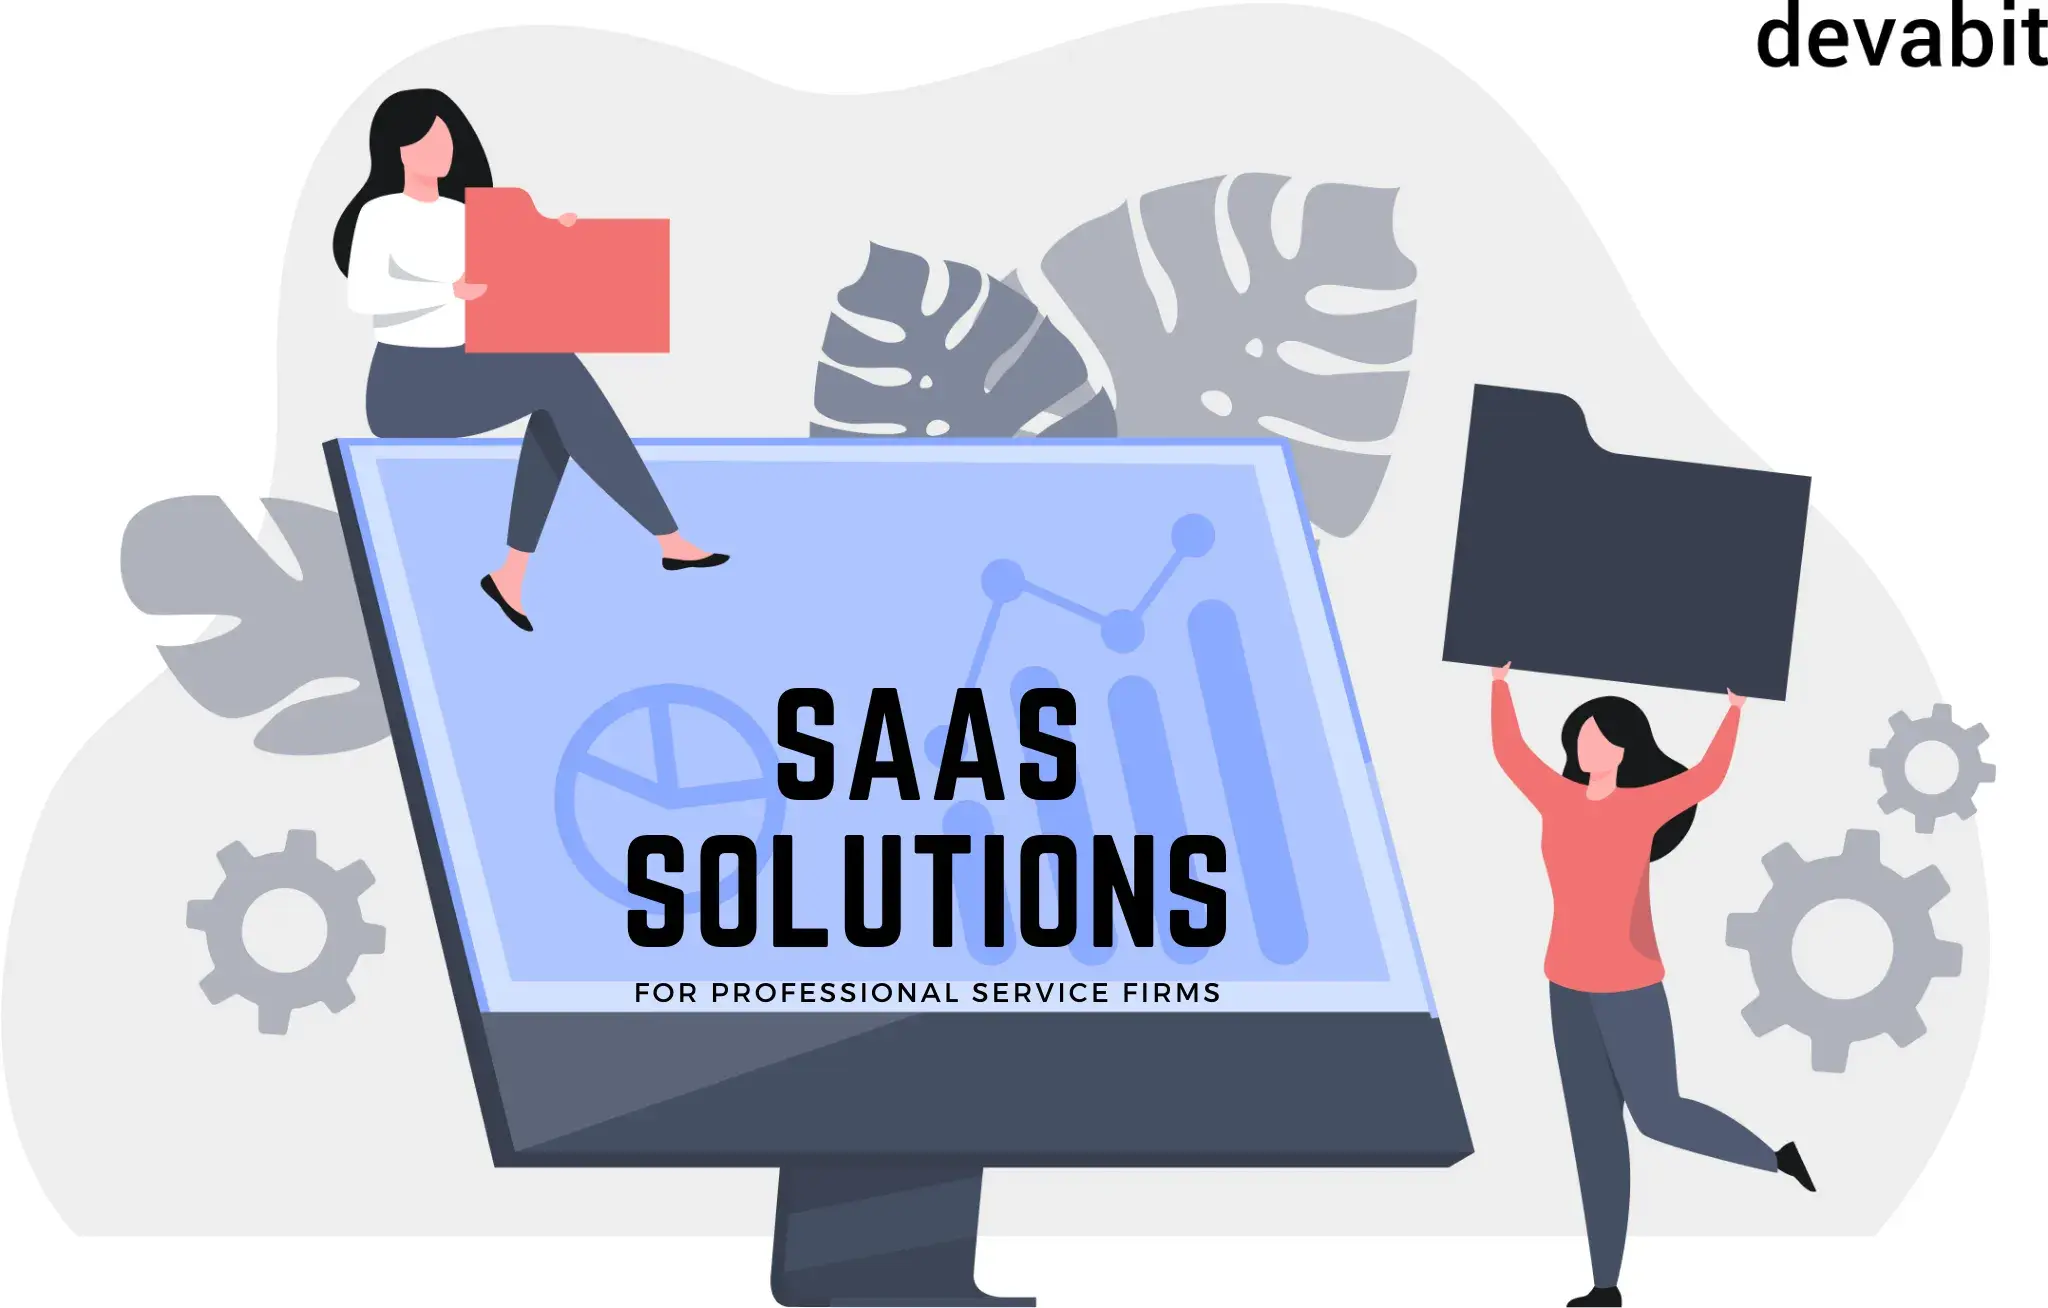 SaaS solutions for professional services firms by devabit